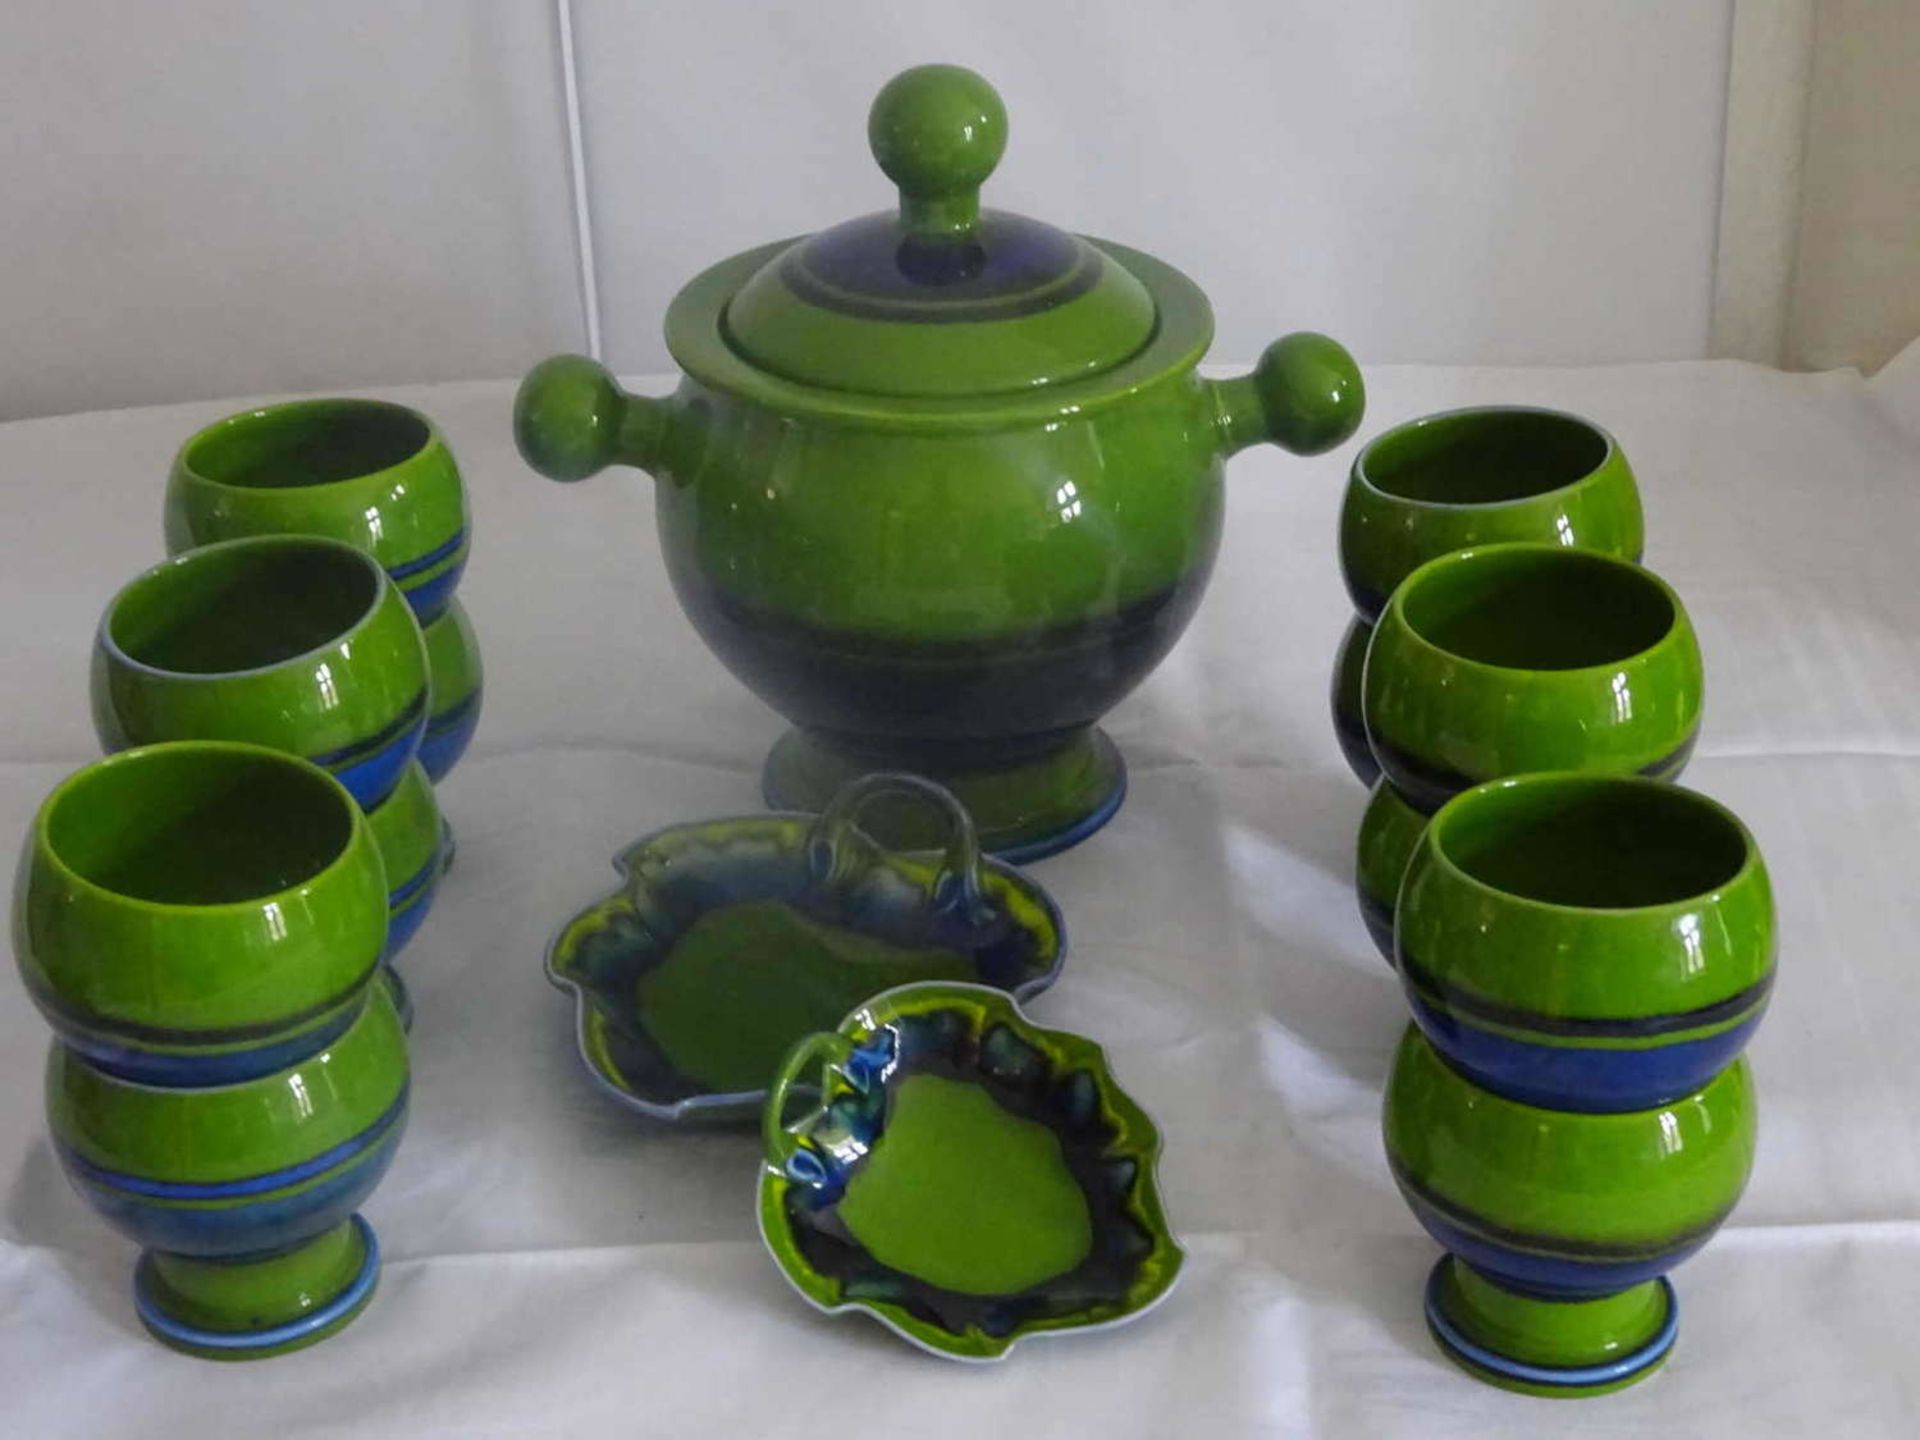 Ceramic Service - soup tureen with 12 soup cups, as well as 2 small bowls. Marked with Leo 1814